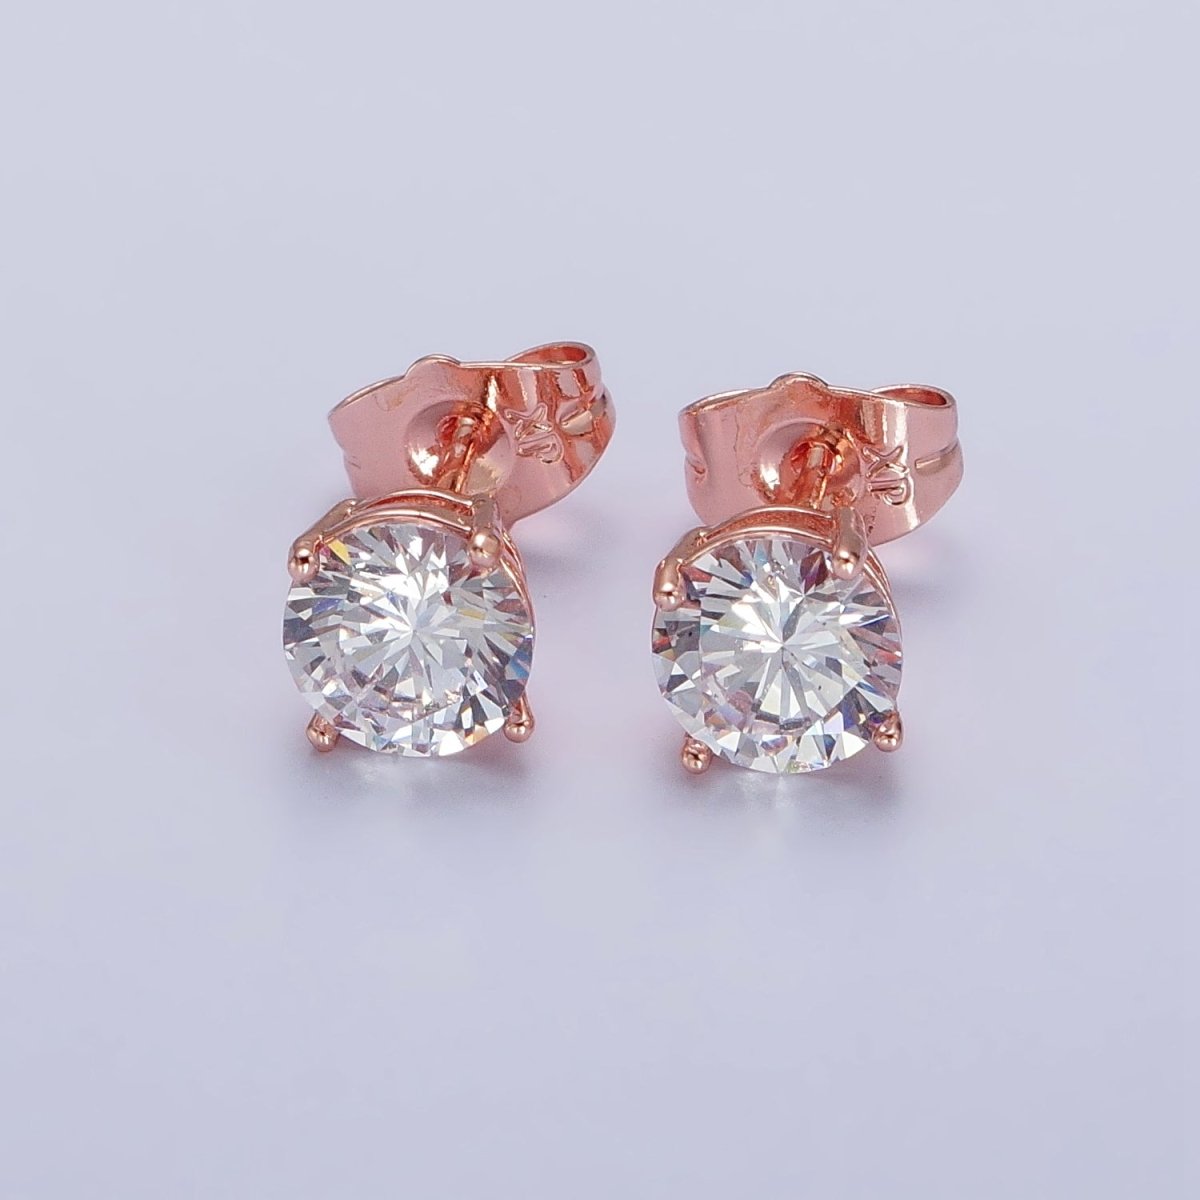 3mm, 4mm, 5mm, 6mm, 7mm, 8mm Clear Round CZ Rose Gold Stud Earrings | AB097 - AB102 - DLUXCA